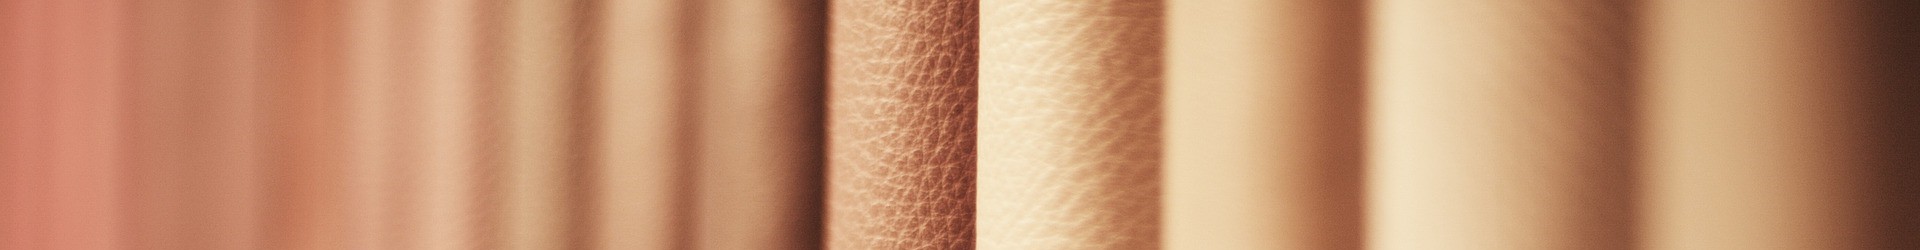 China Decorated Hot And Passion Range Upholstery Leather For Upholstery